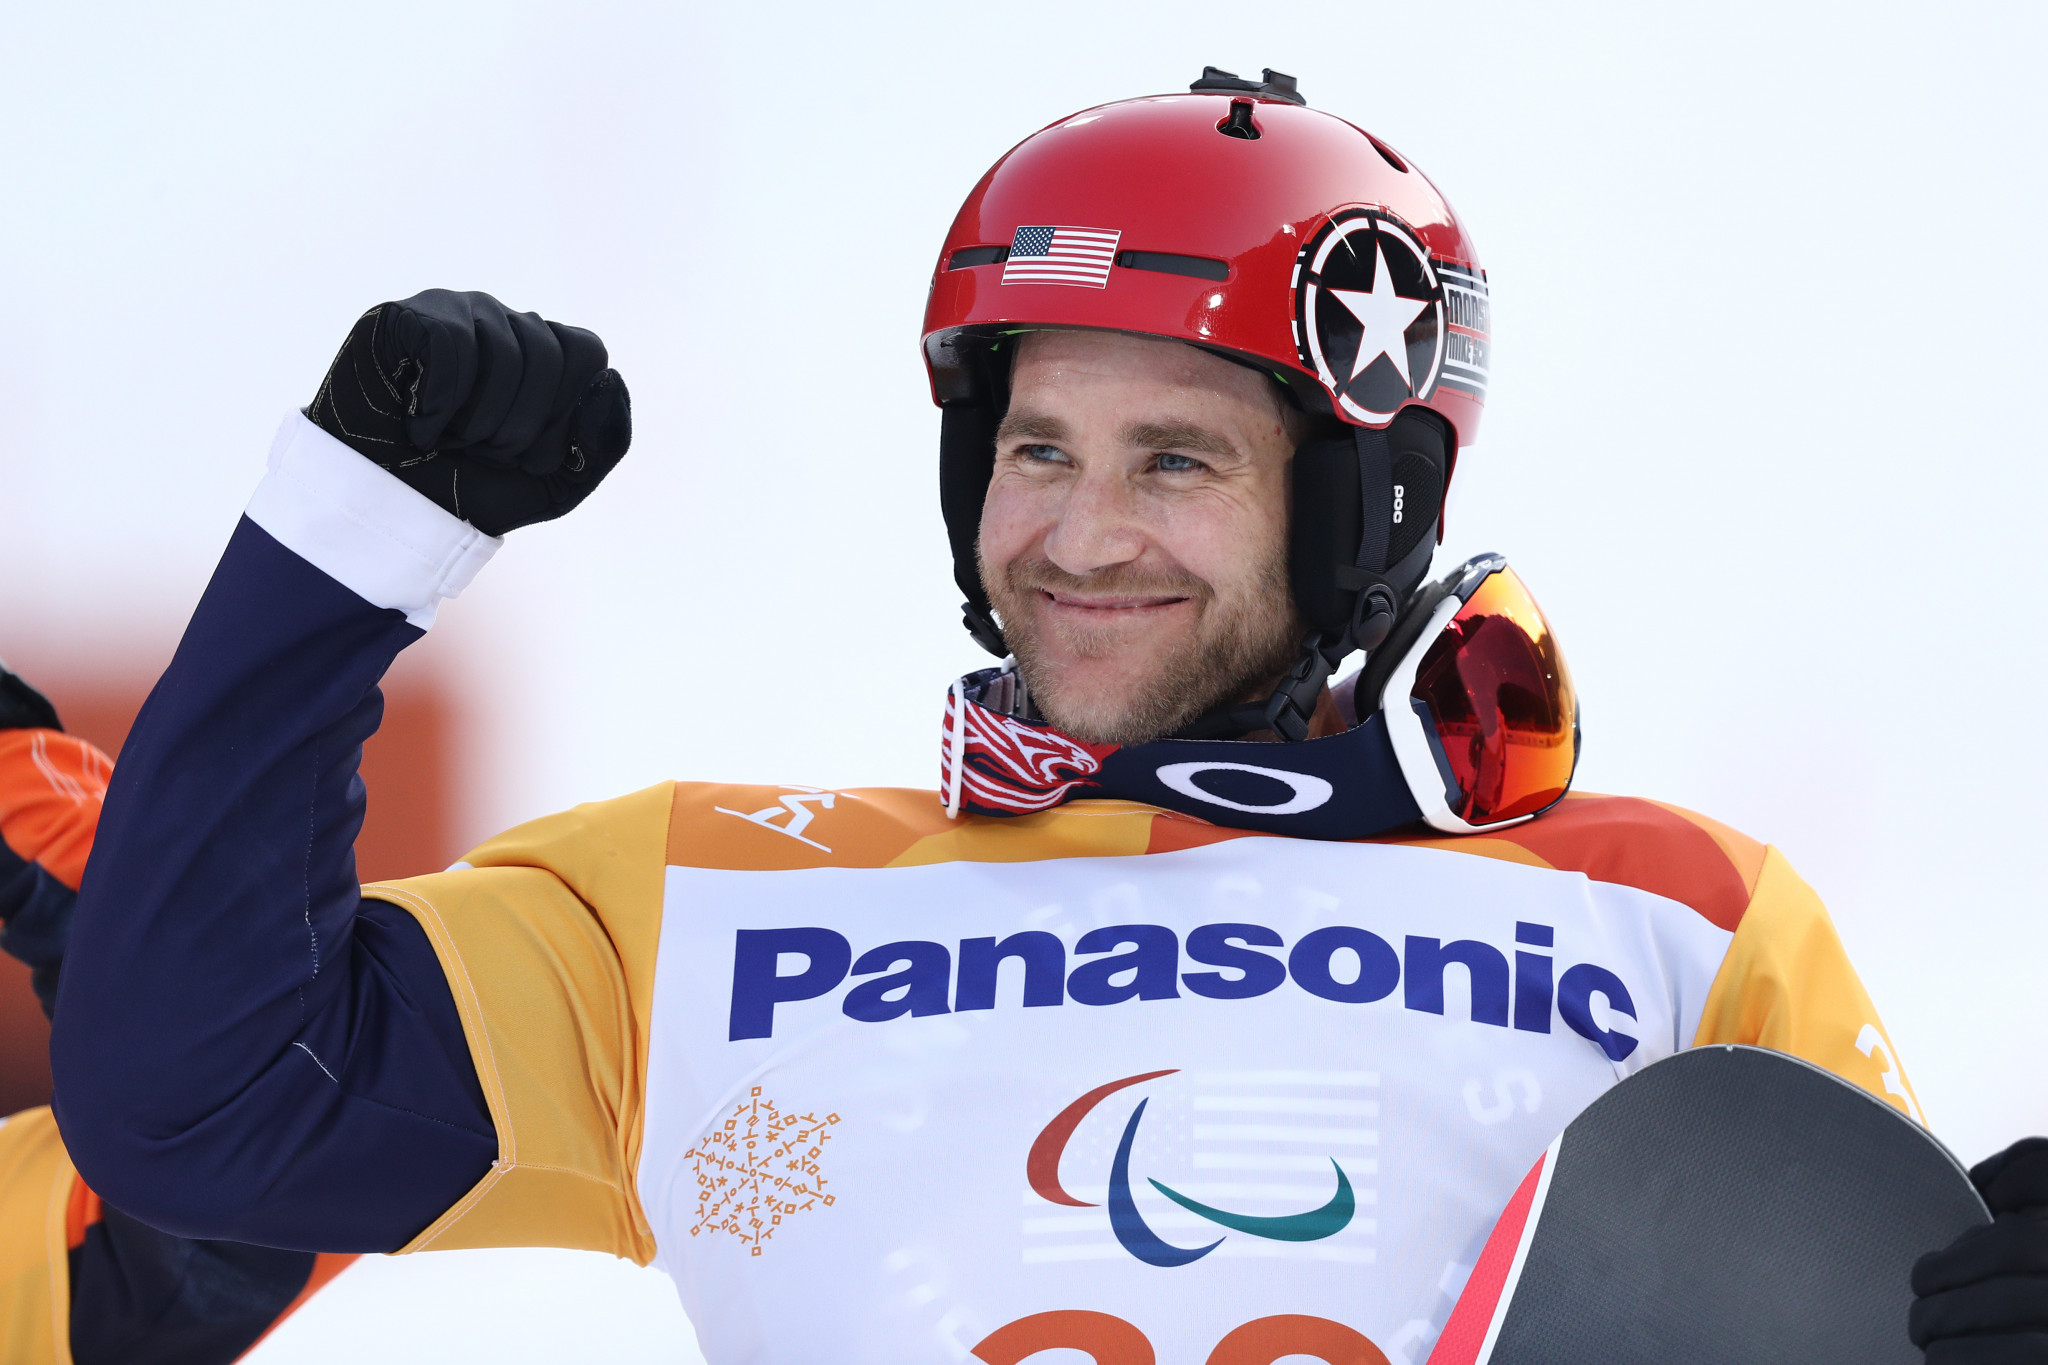 The United States' reigning Paralympic champion Mike Schultz will go for victory again in the men's snowboard cross lower limb impairment one class in Big White in Canada ©Getty Images